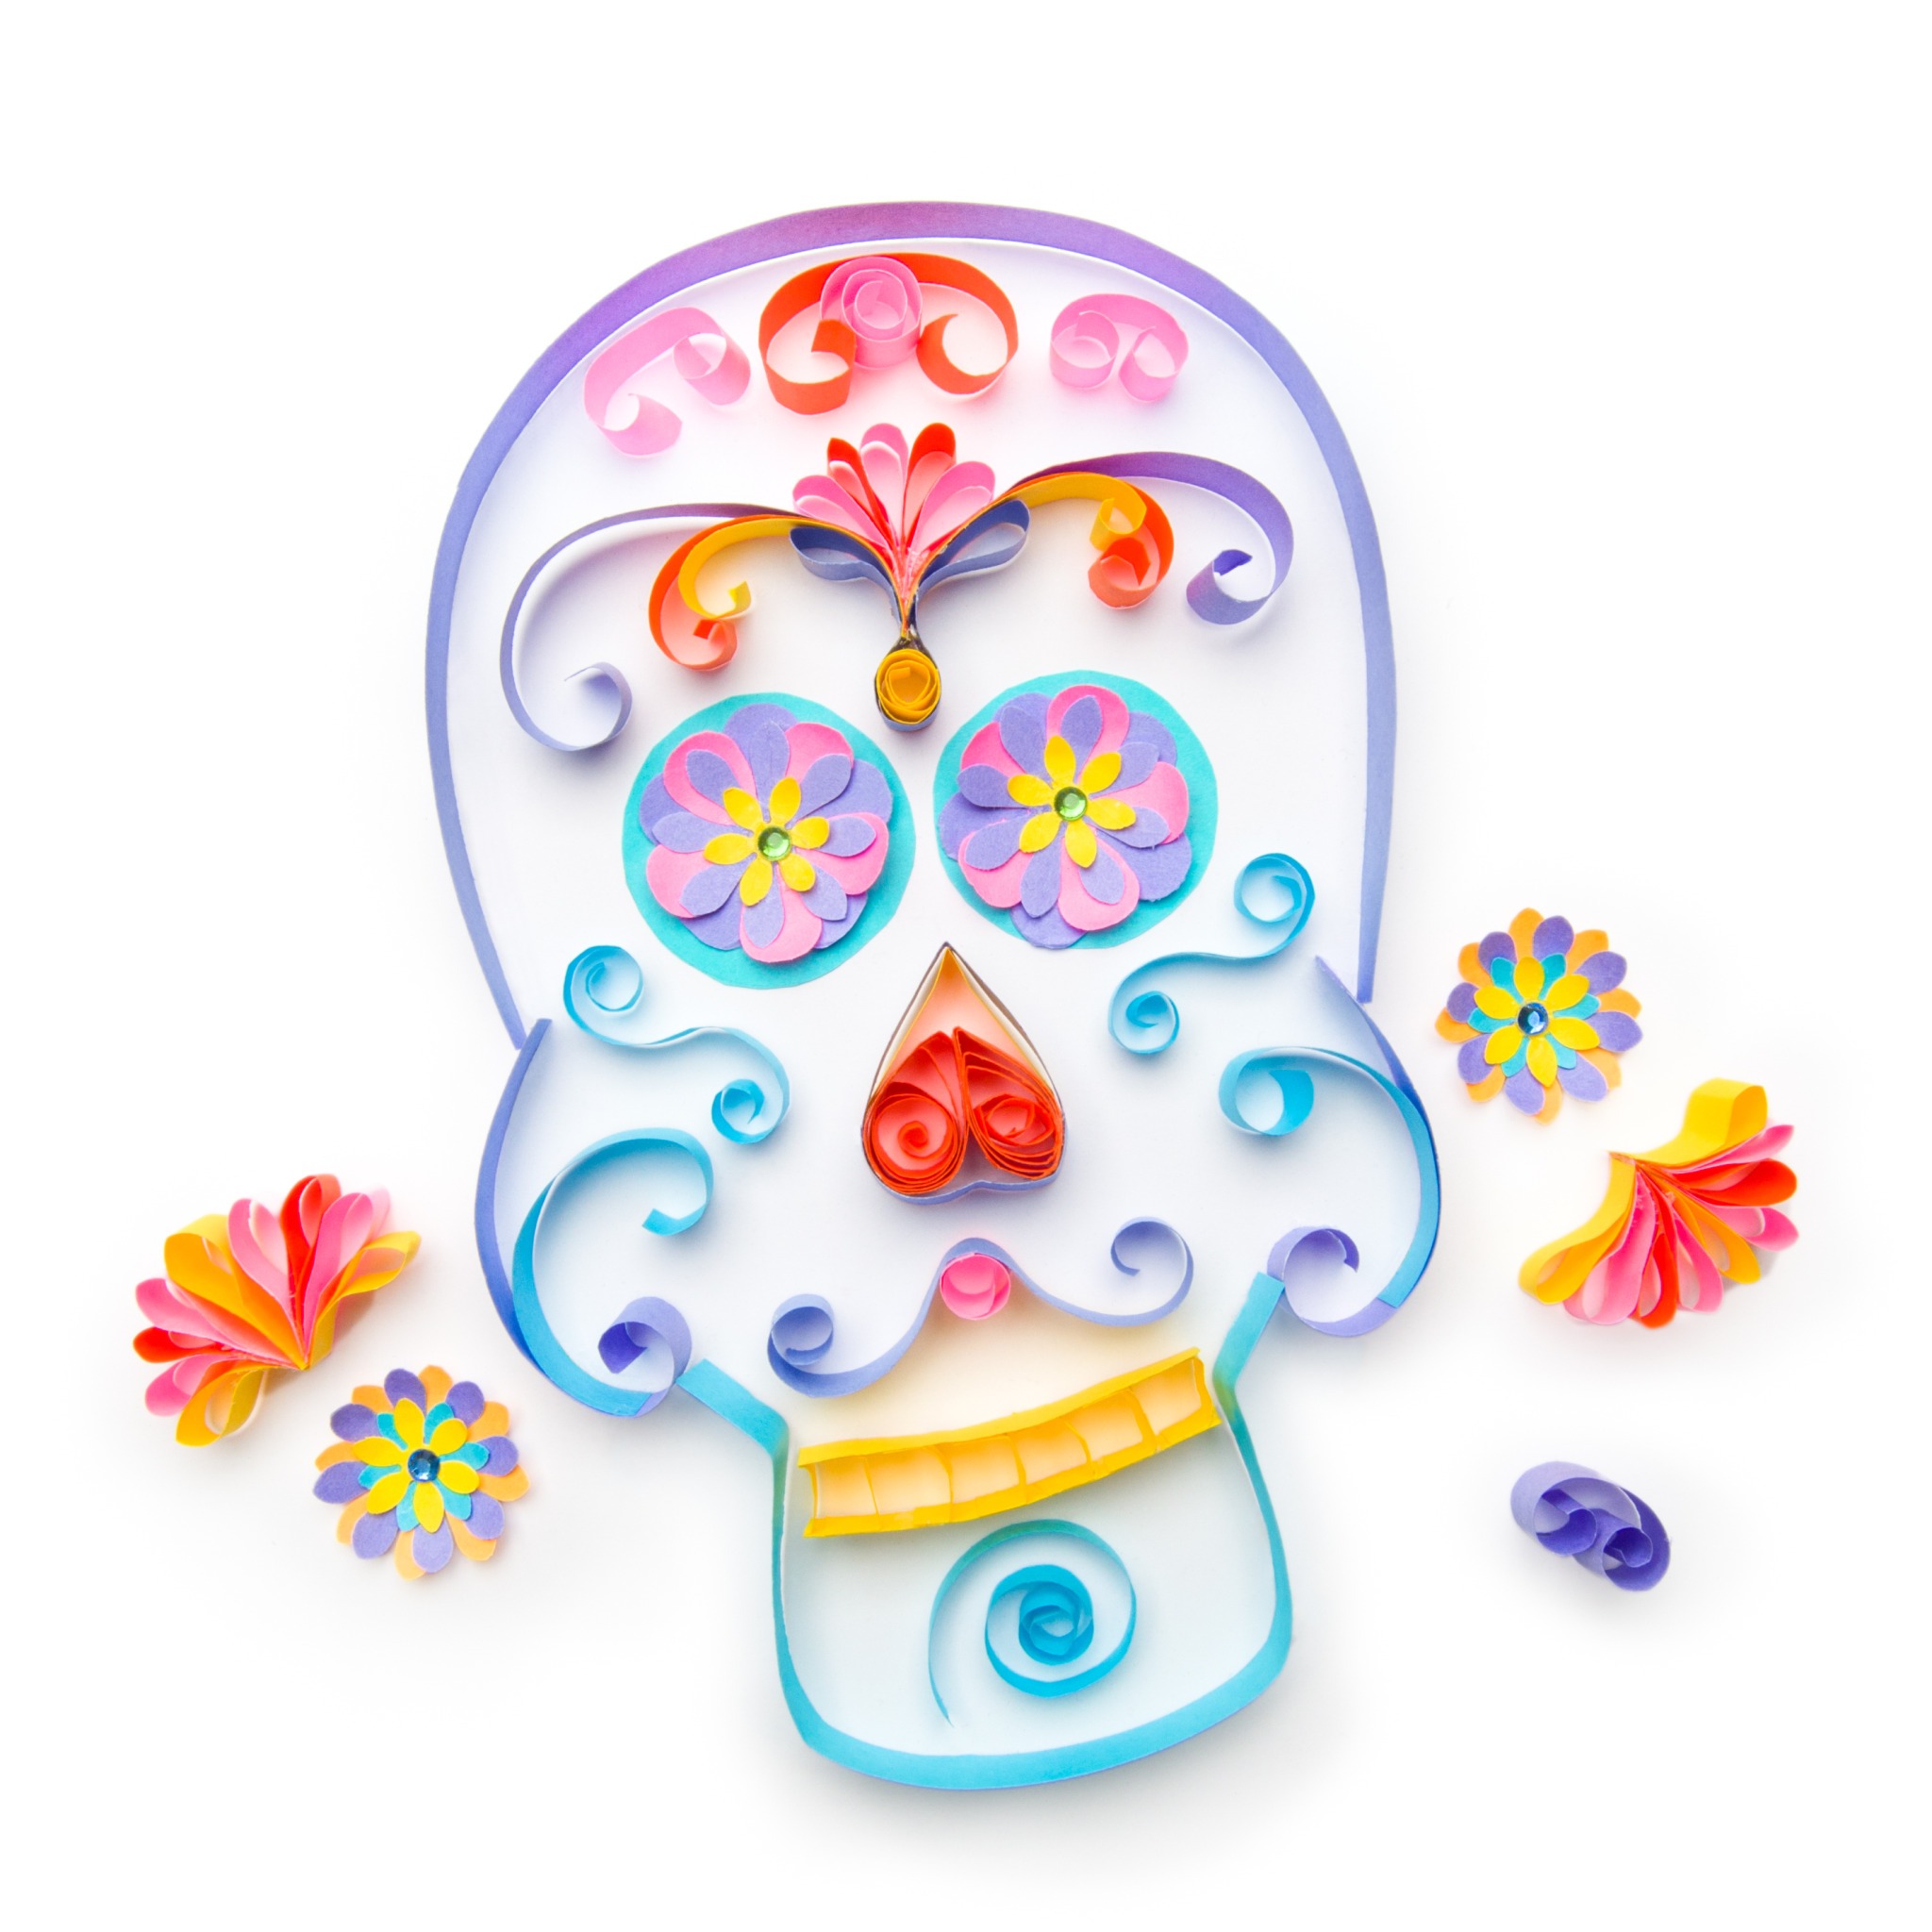 Easy Day of the Dead Craft: Sugar Skull Quilling Project